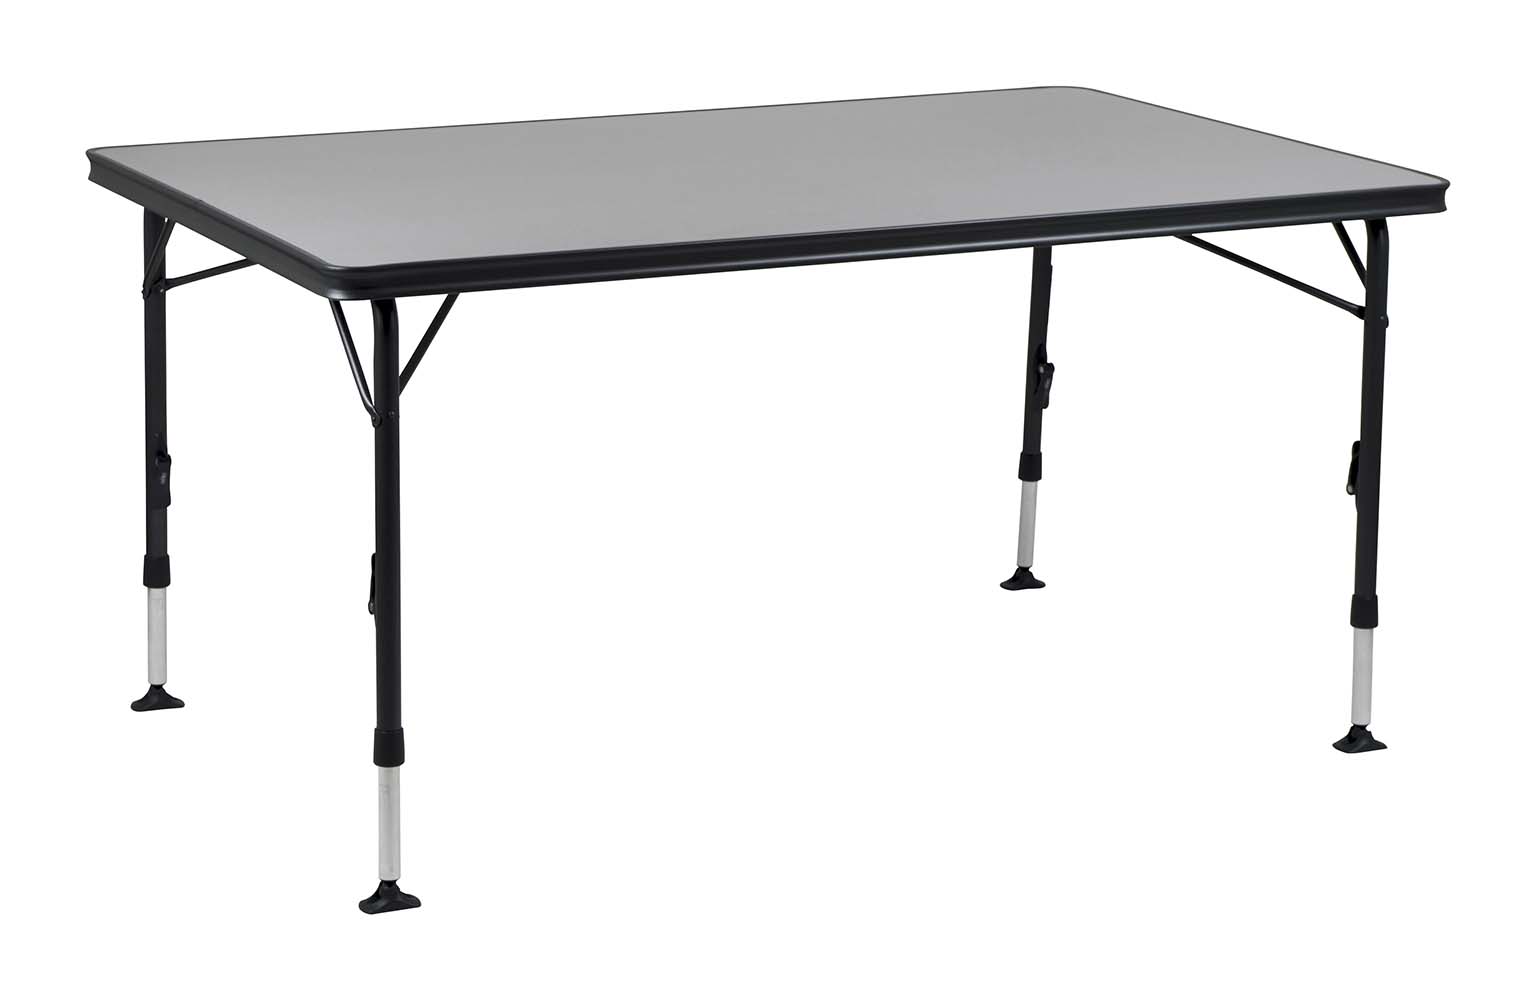 1151420 A stable high quality table. Thanks to its special construction this table is easy to open and close. In addition the feet are easy to mount in the guided aluminium rails on the underside of the table top. The table top is extra spacious so that it can accommodate up to 6 persons. The aluminium rails at the bottom of this camp table also provide additional reinforcement. The high-quality materials and heat-resistant and waterproof tabletop ensure a long service life. The feet provide high stability through the thick (28 mm) and extra-reinforced pipes. The stabilizing feet provide extra grip on any surface. This table is light weight because of the aluminium frame.